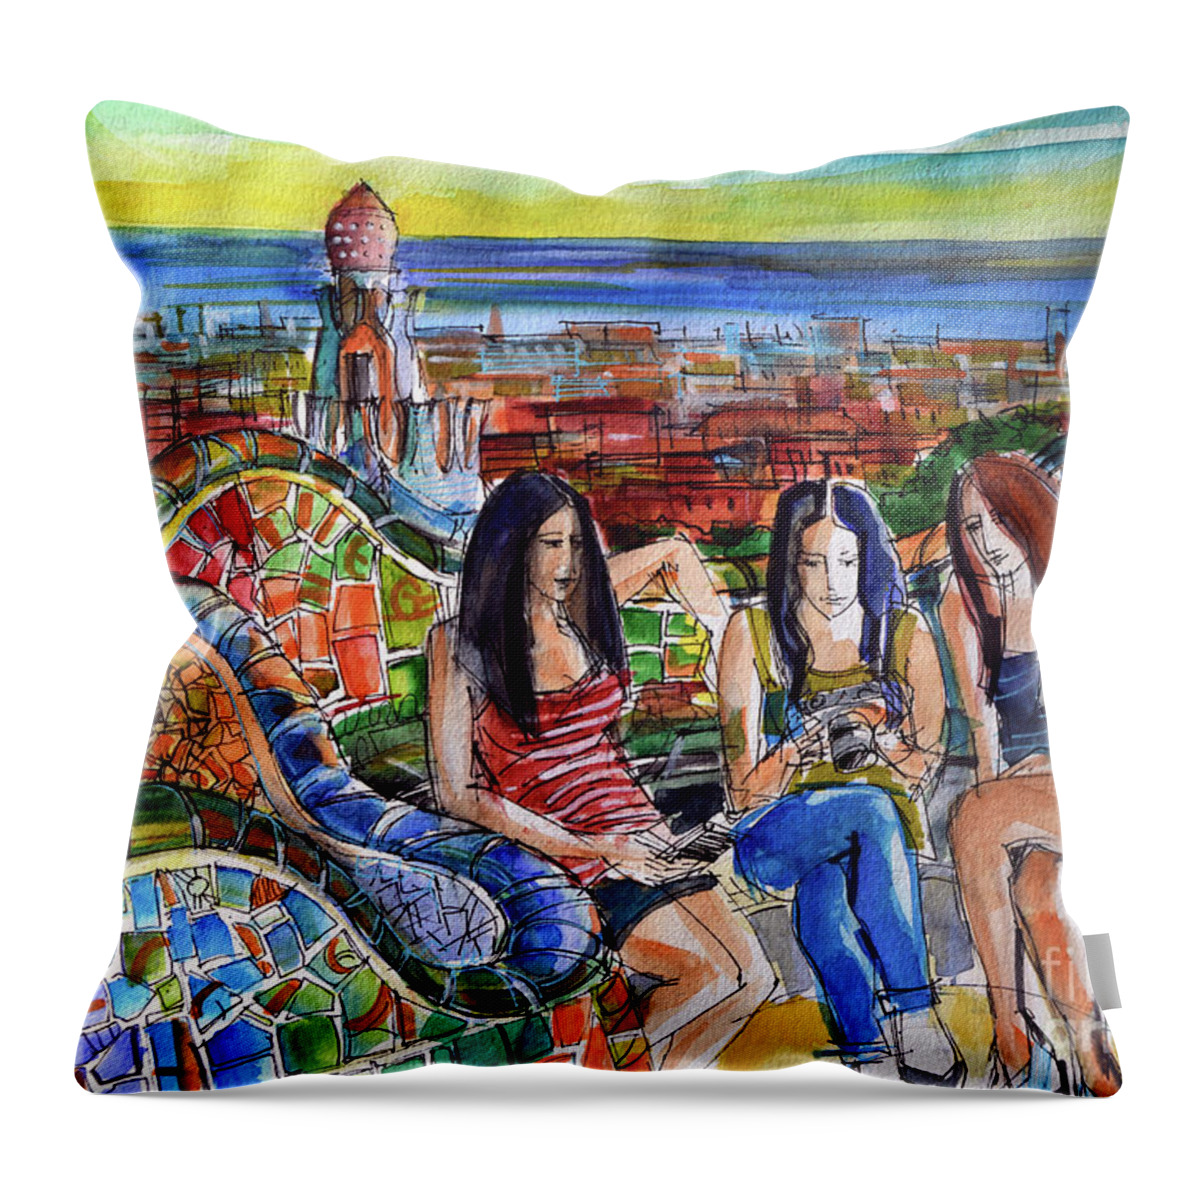 Park Guell Throw Pillow featuring the painting Park Guell Barcelona Photo Session by Mona Edulesco